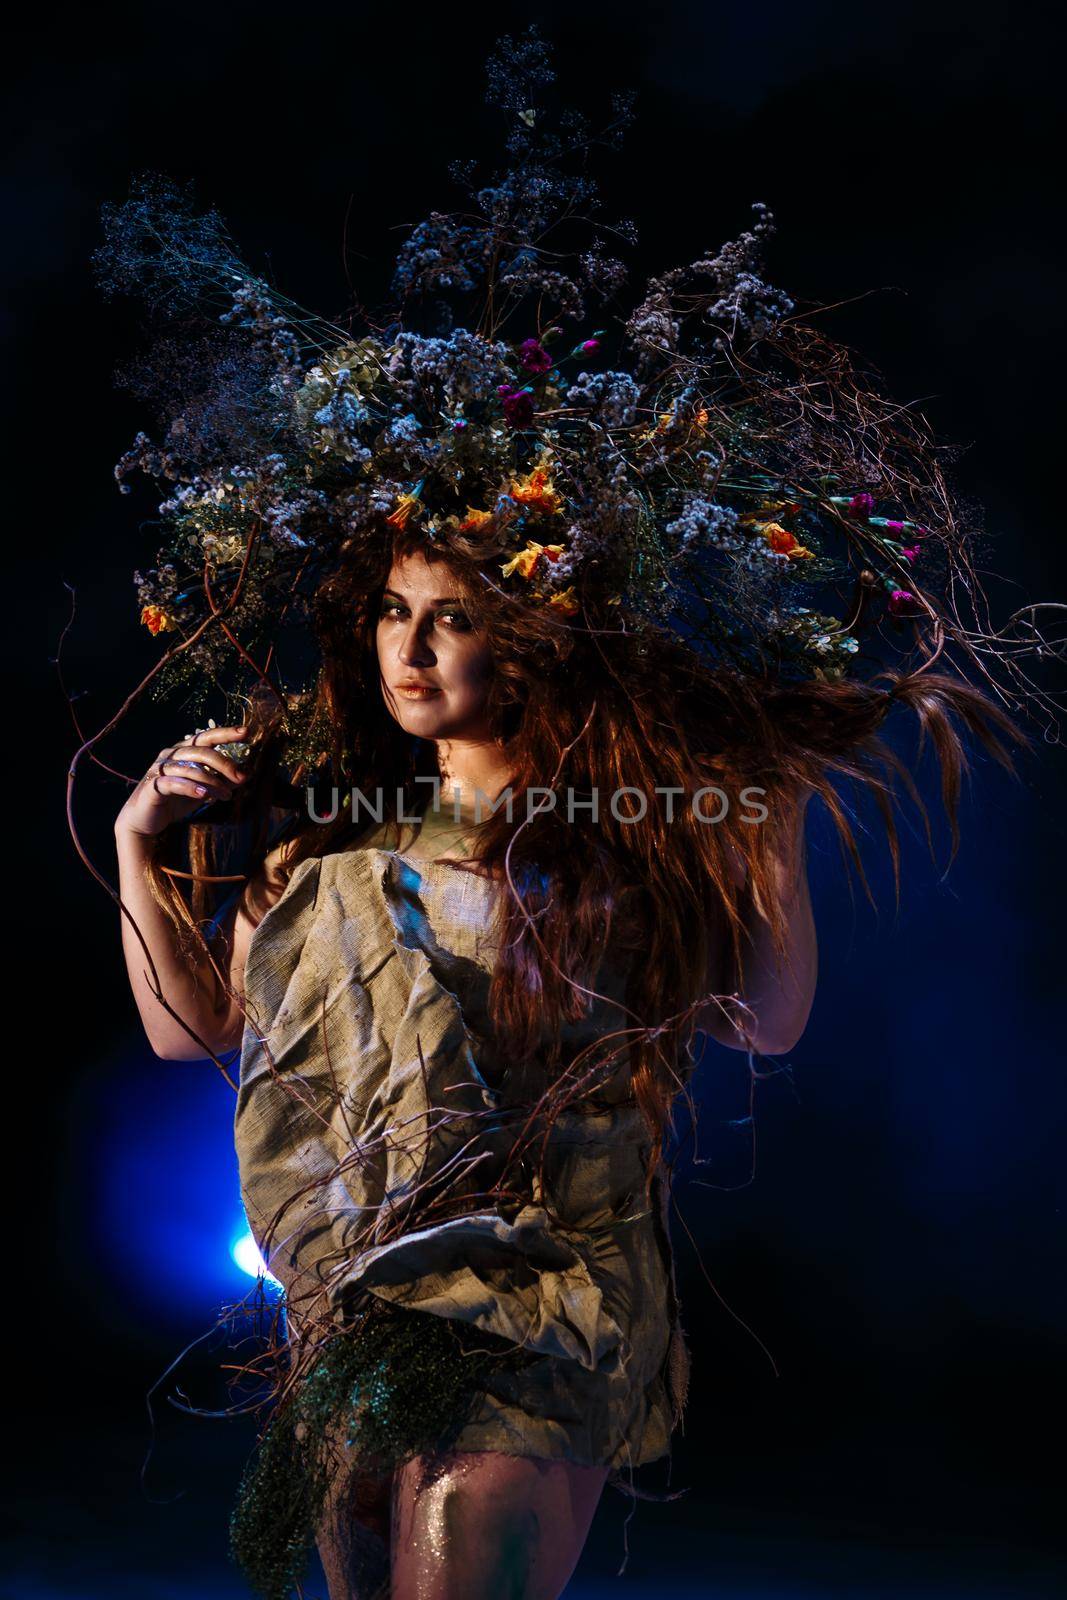 Dryad, Muse from the forest, standing in blue light and smoke by deandy